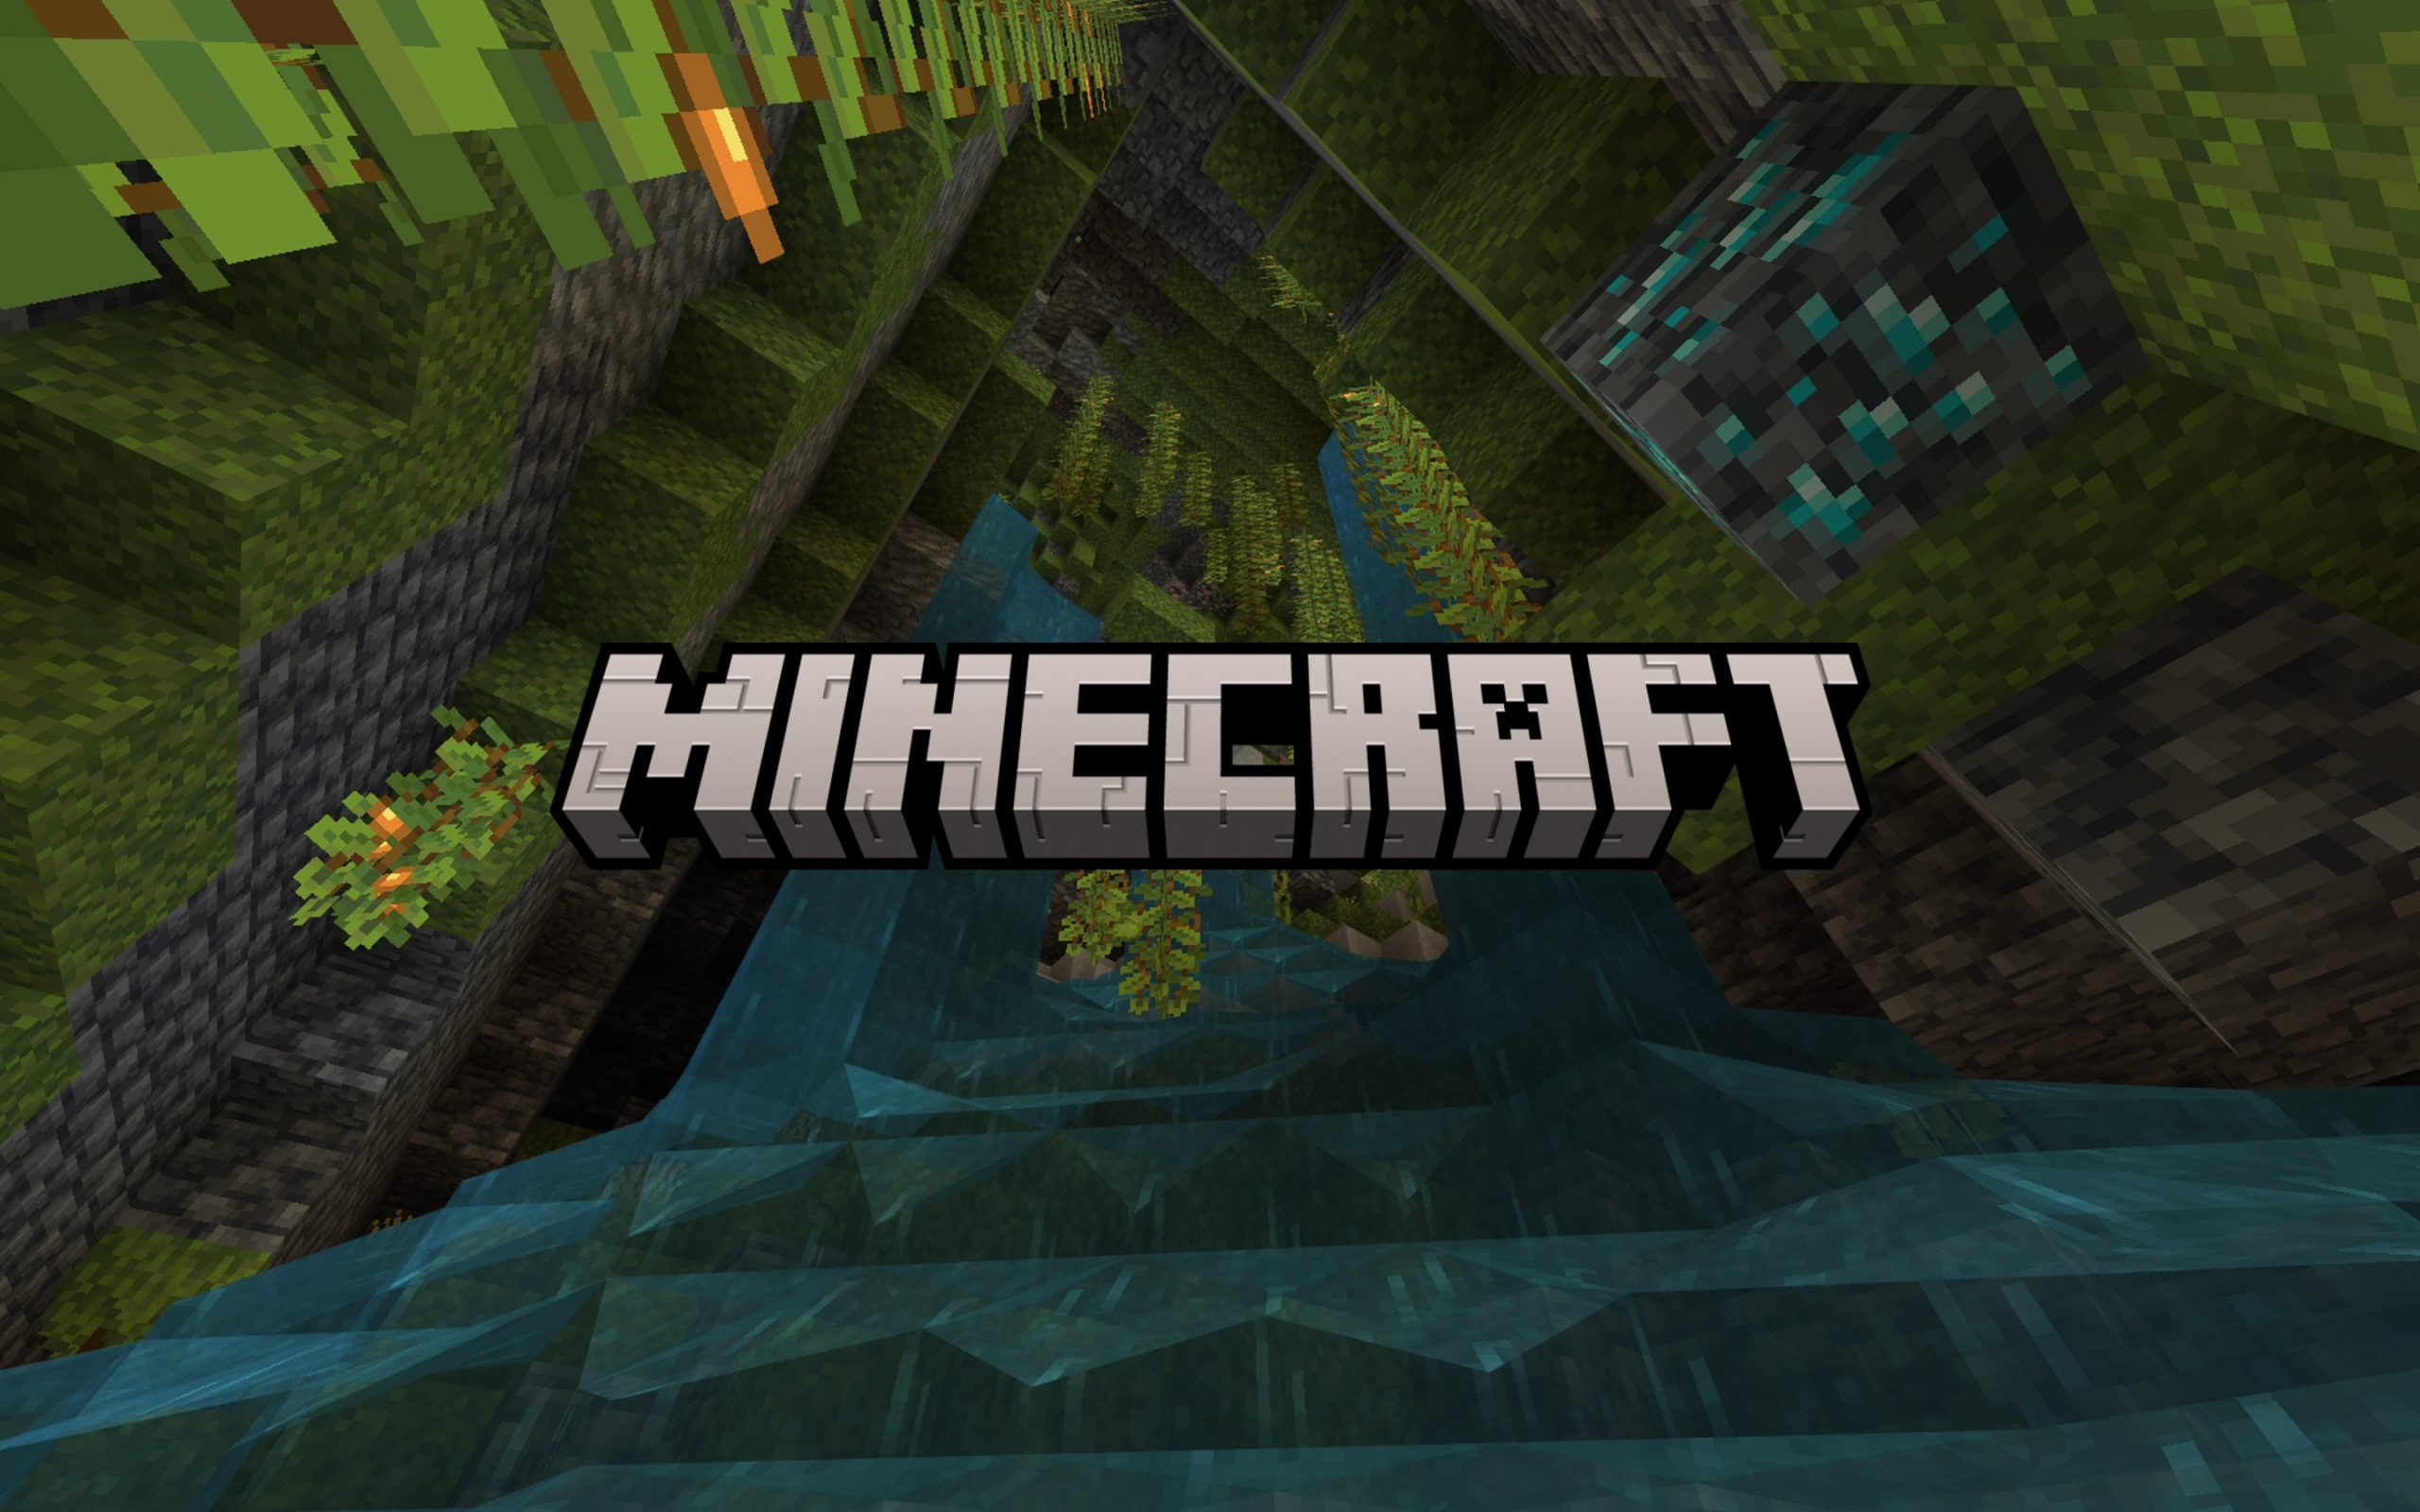 Image is of the Minecraft logo. Behind the logo is a Minecraft woodland and water scene.